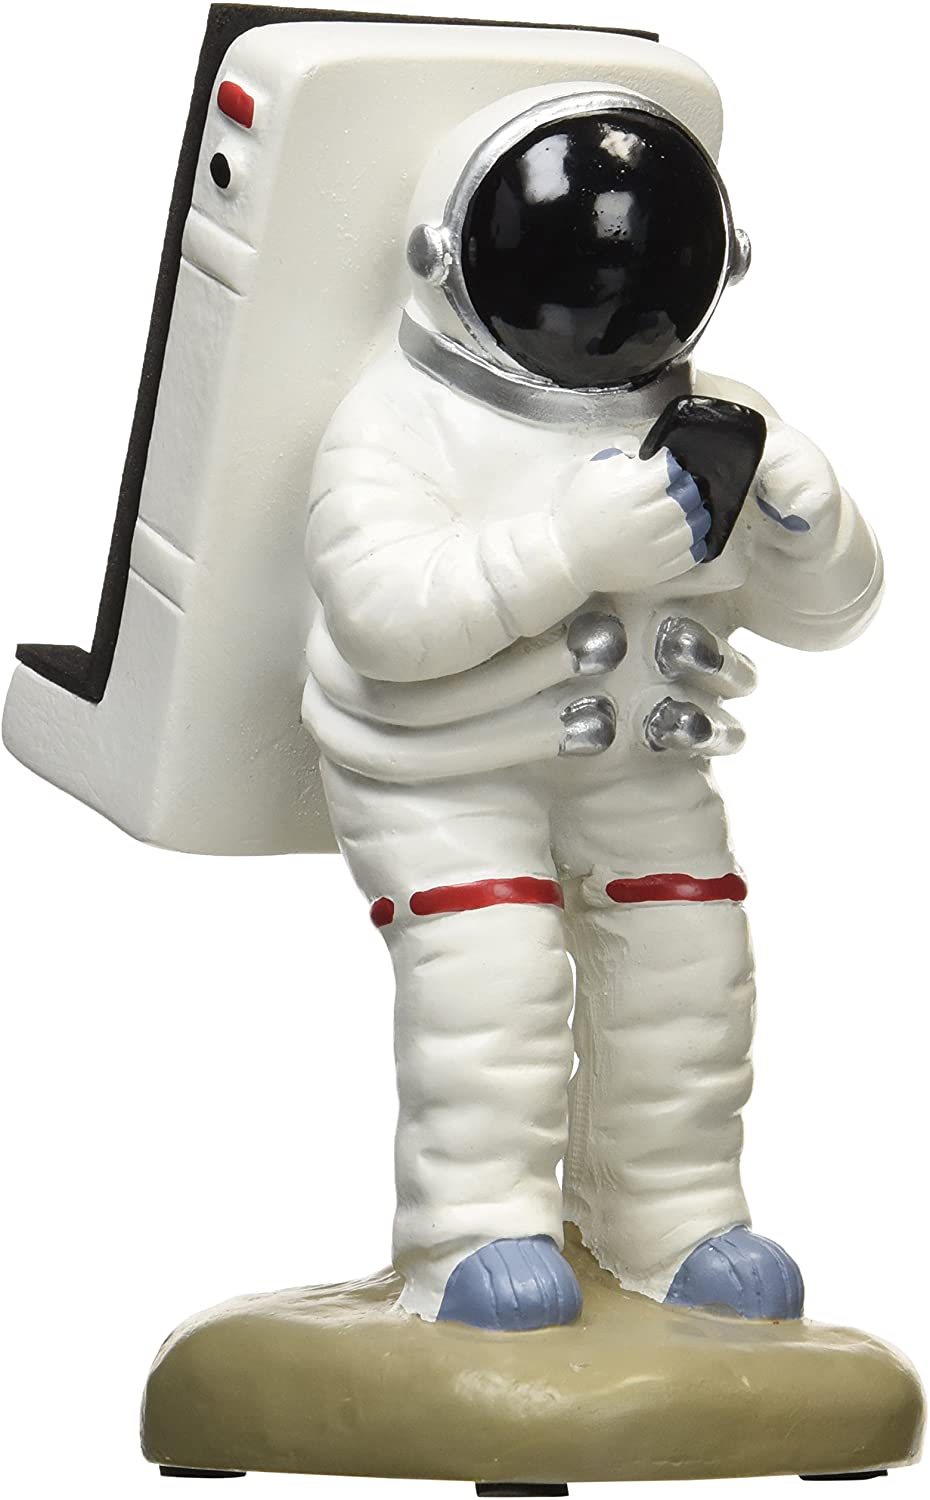 Astronaut Phone Stand by Seto Craft